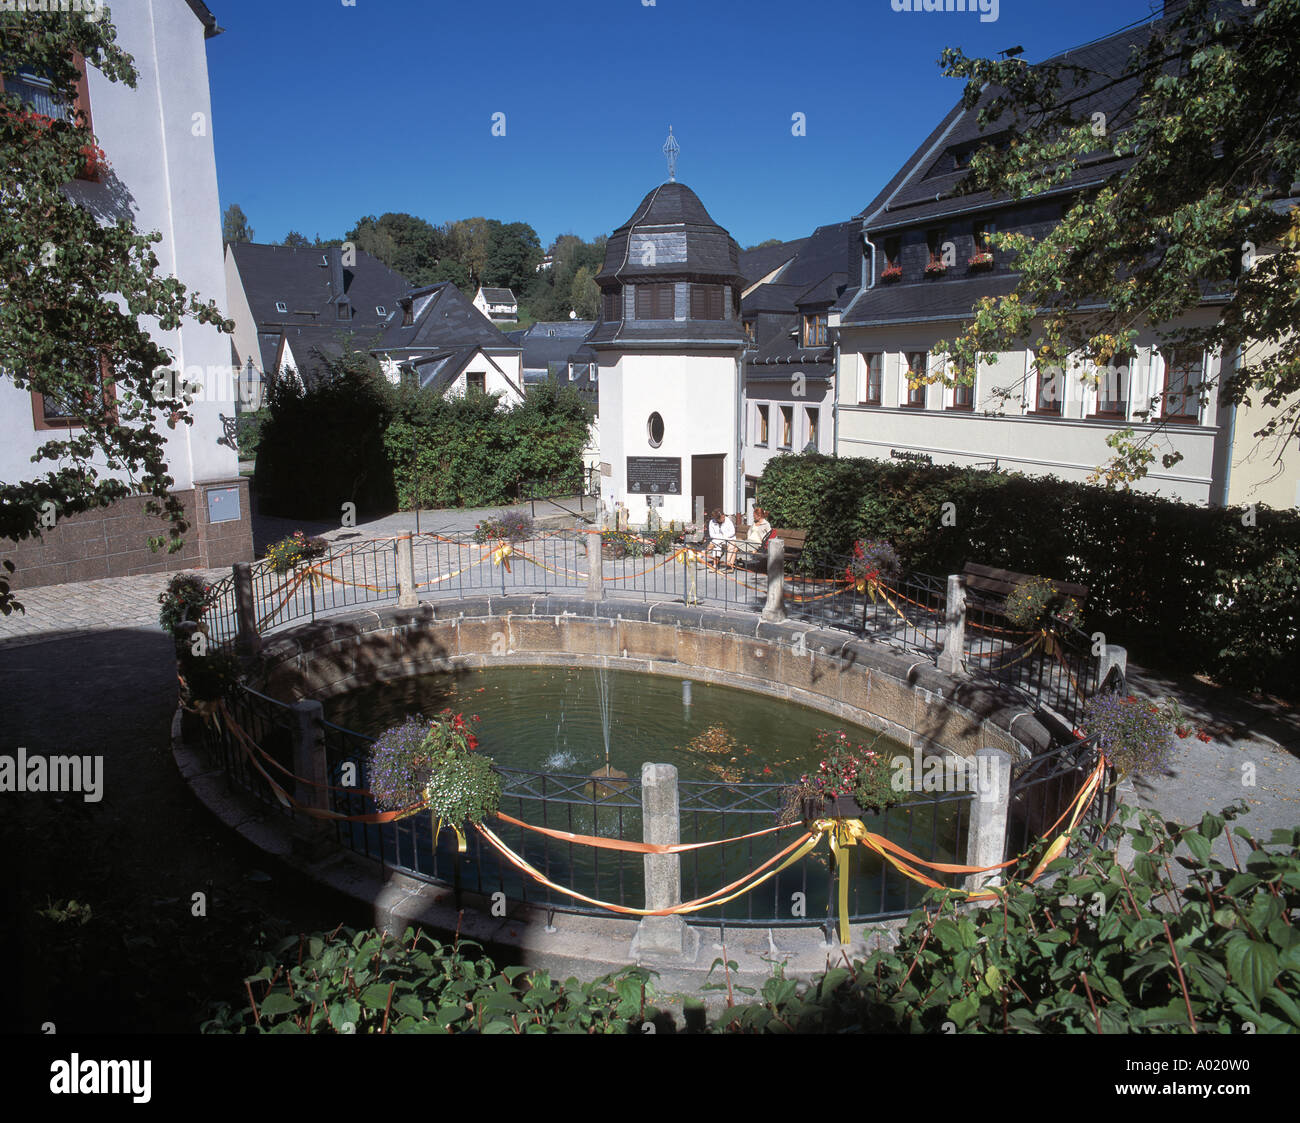 Schwarzwasser High Resolution Stock Photography and Images - Alamy